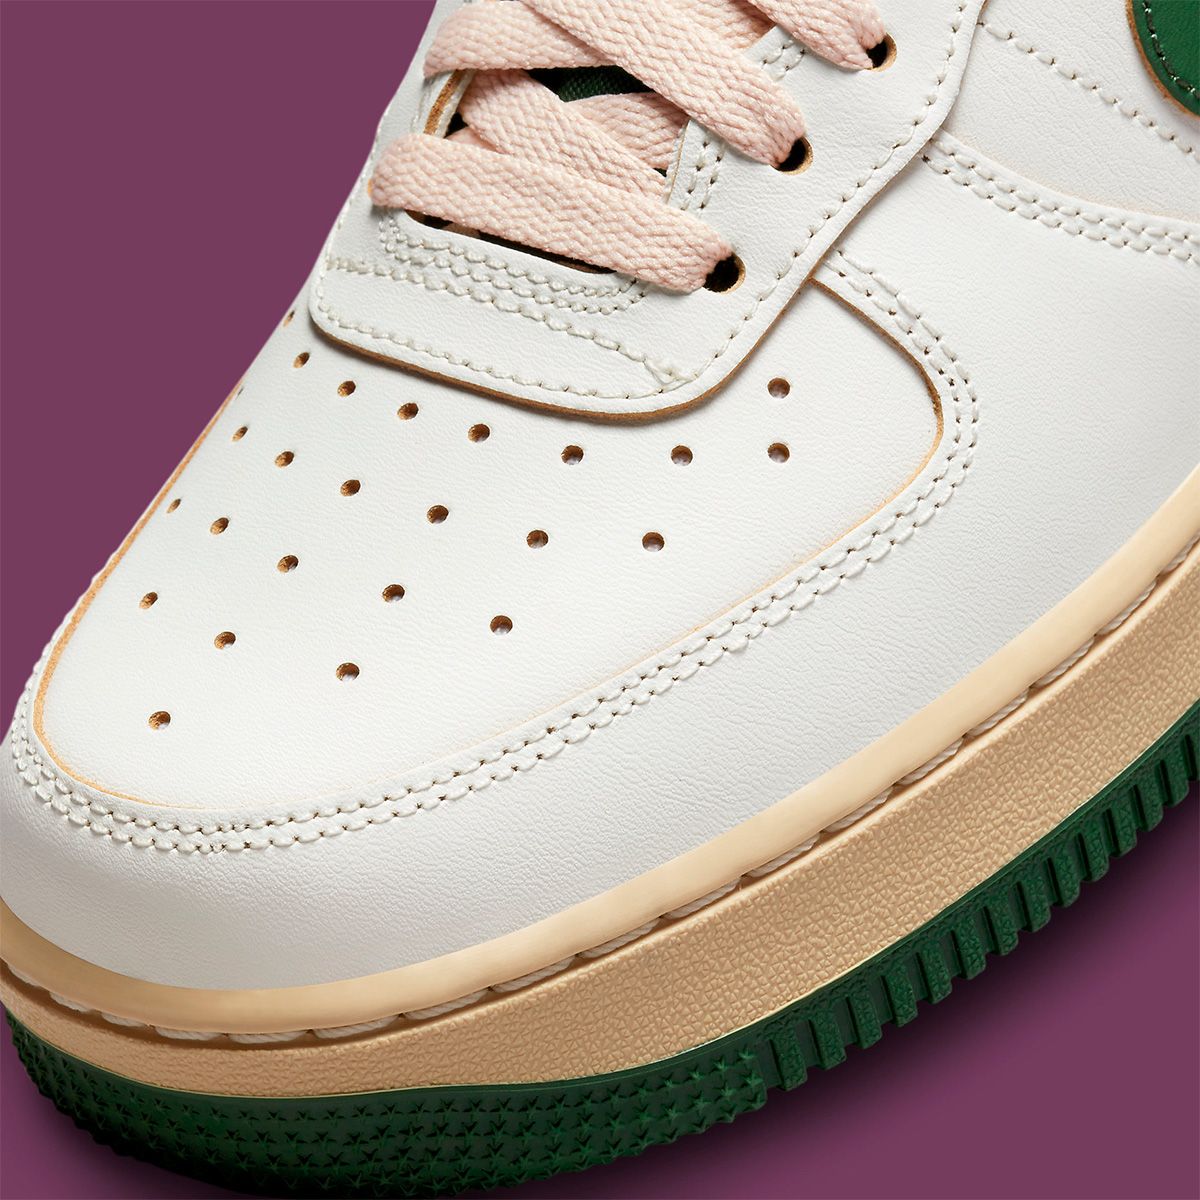 Aged-Look Air Force 1 Low Appears with Green and Muslin Accents